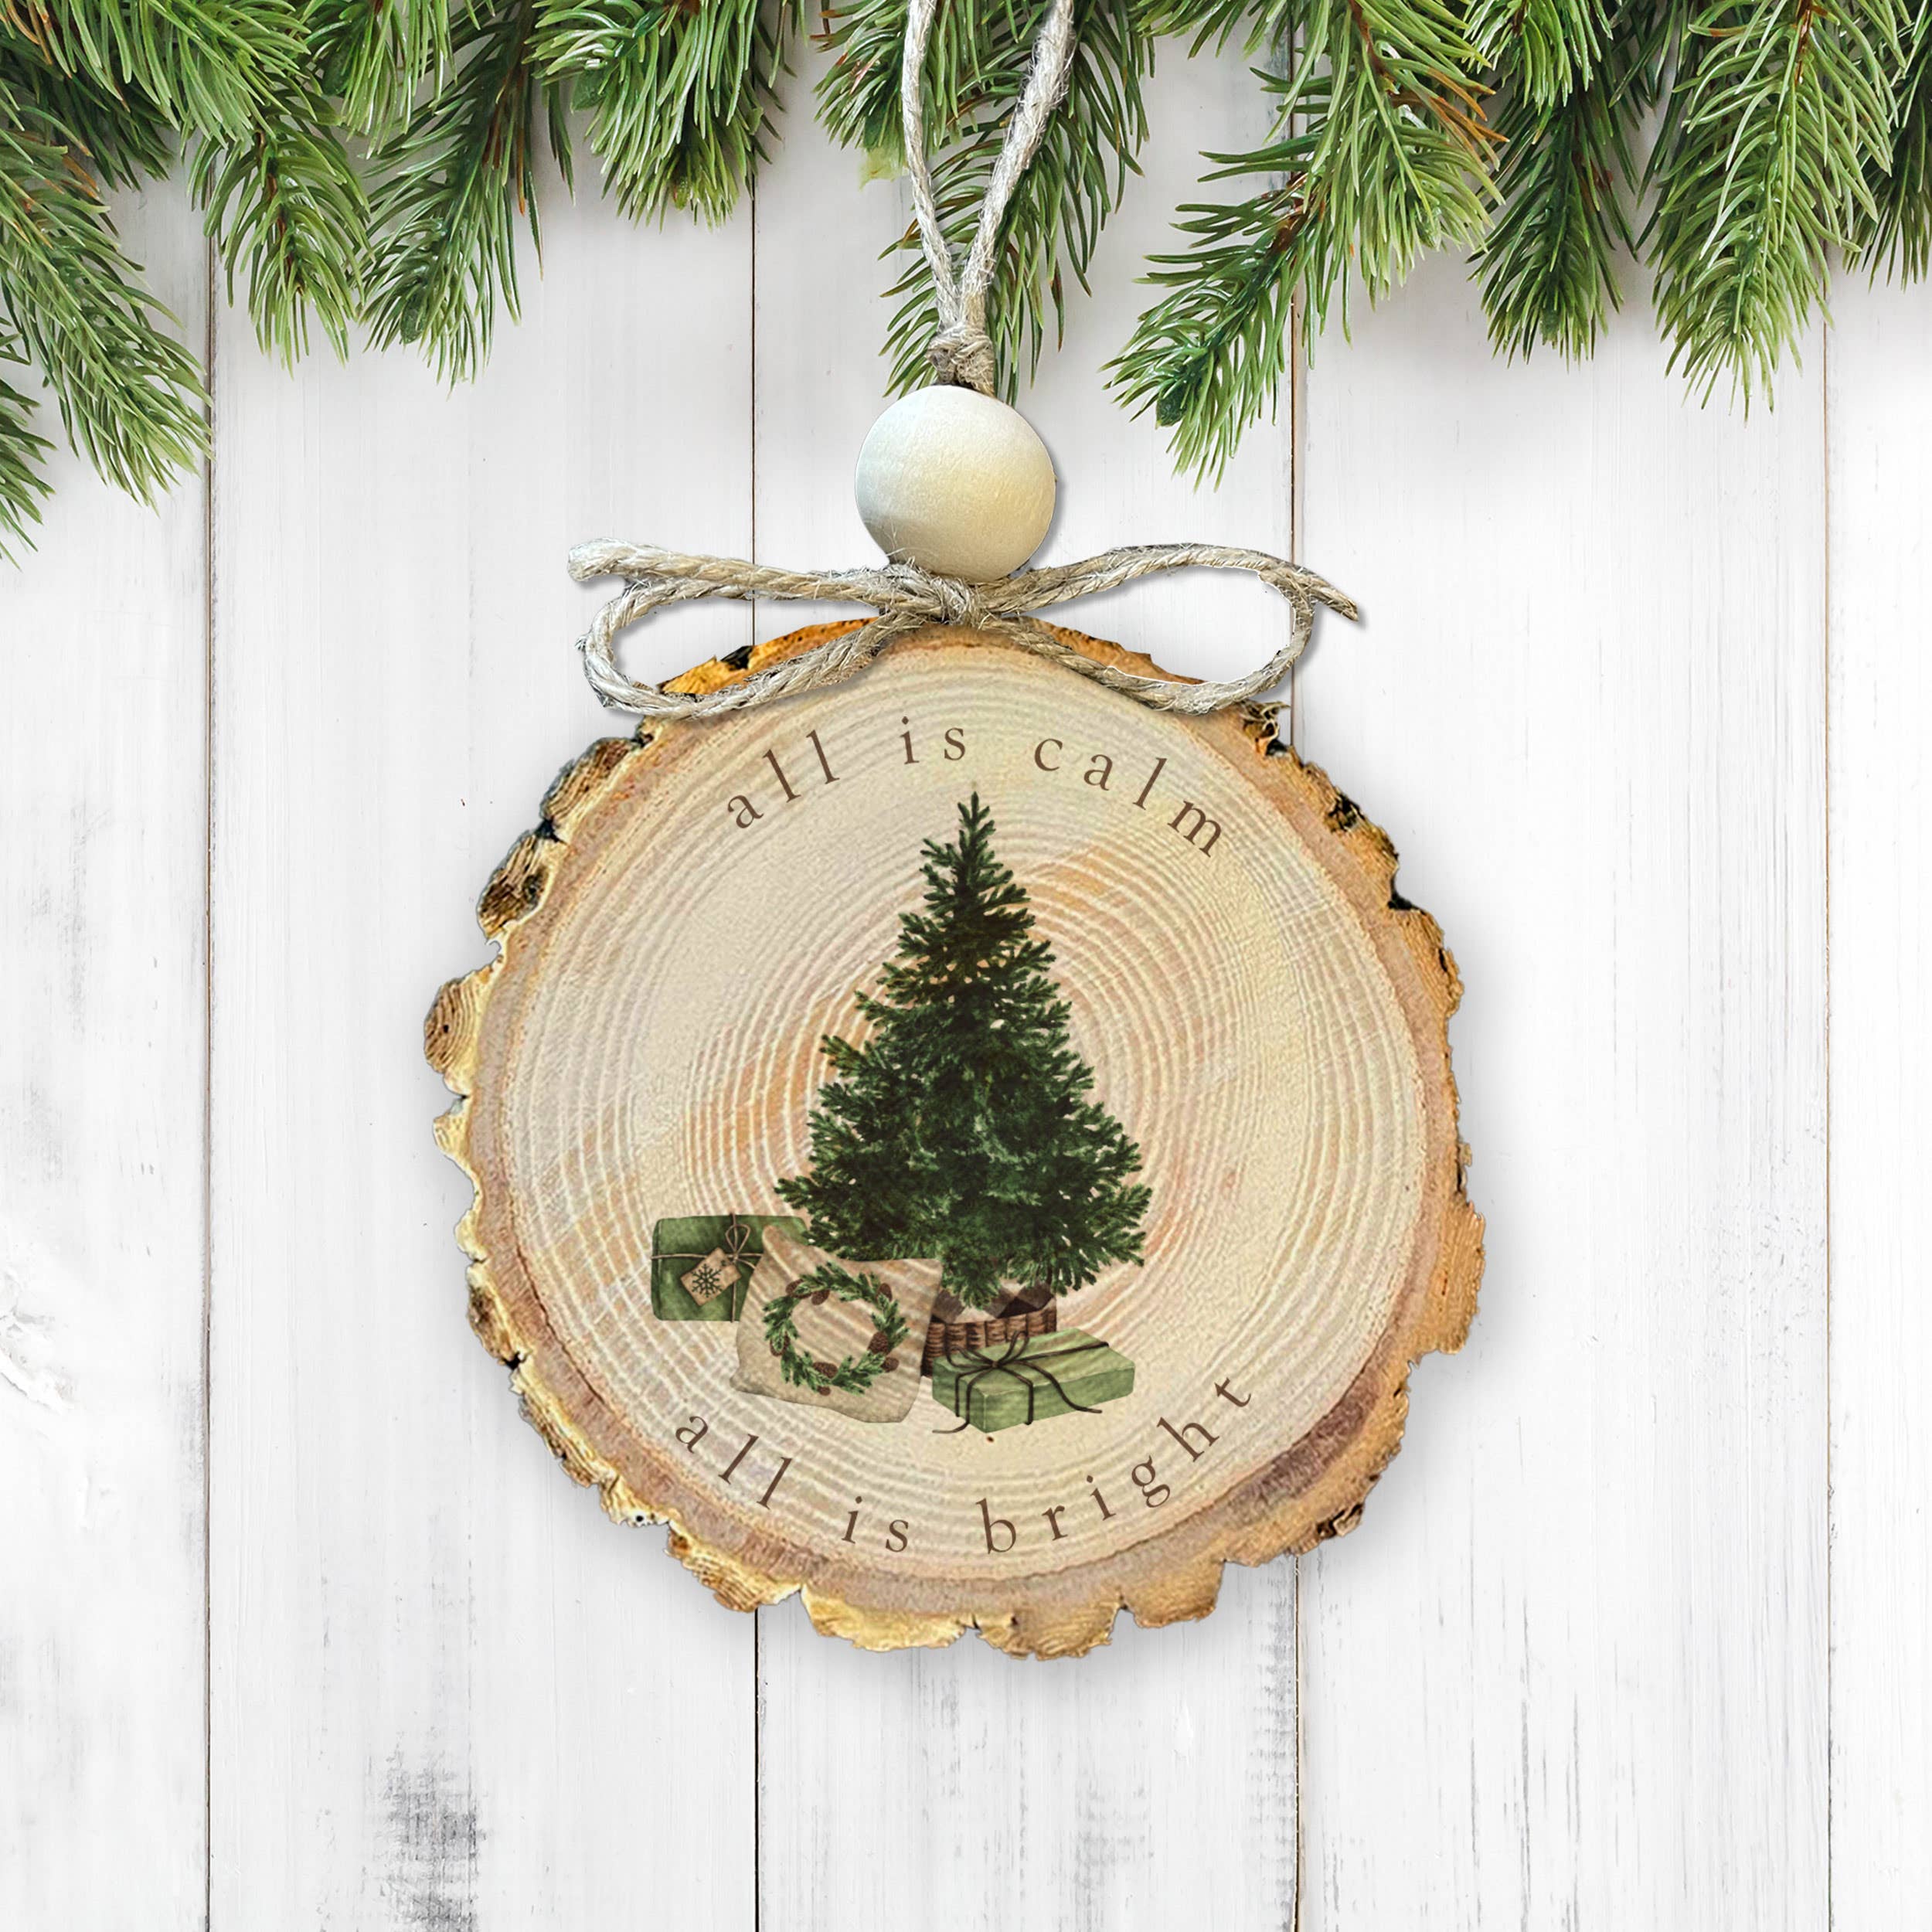 High-Quality wood slices with bark for Decoration and More 